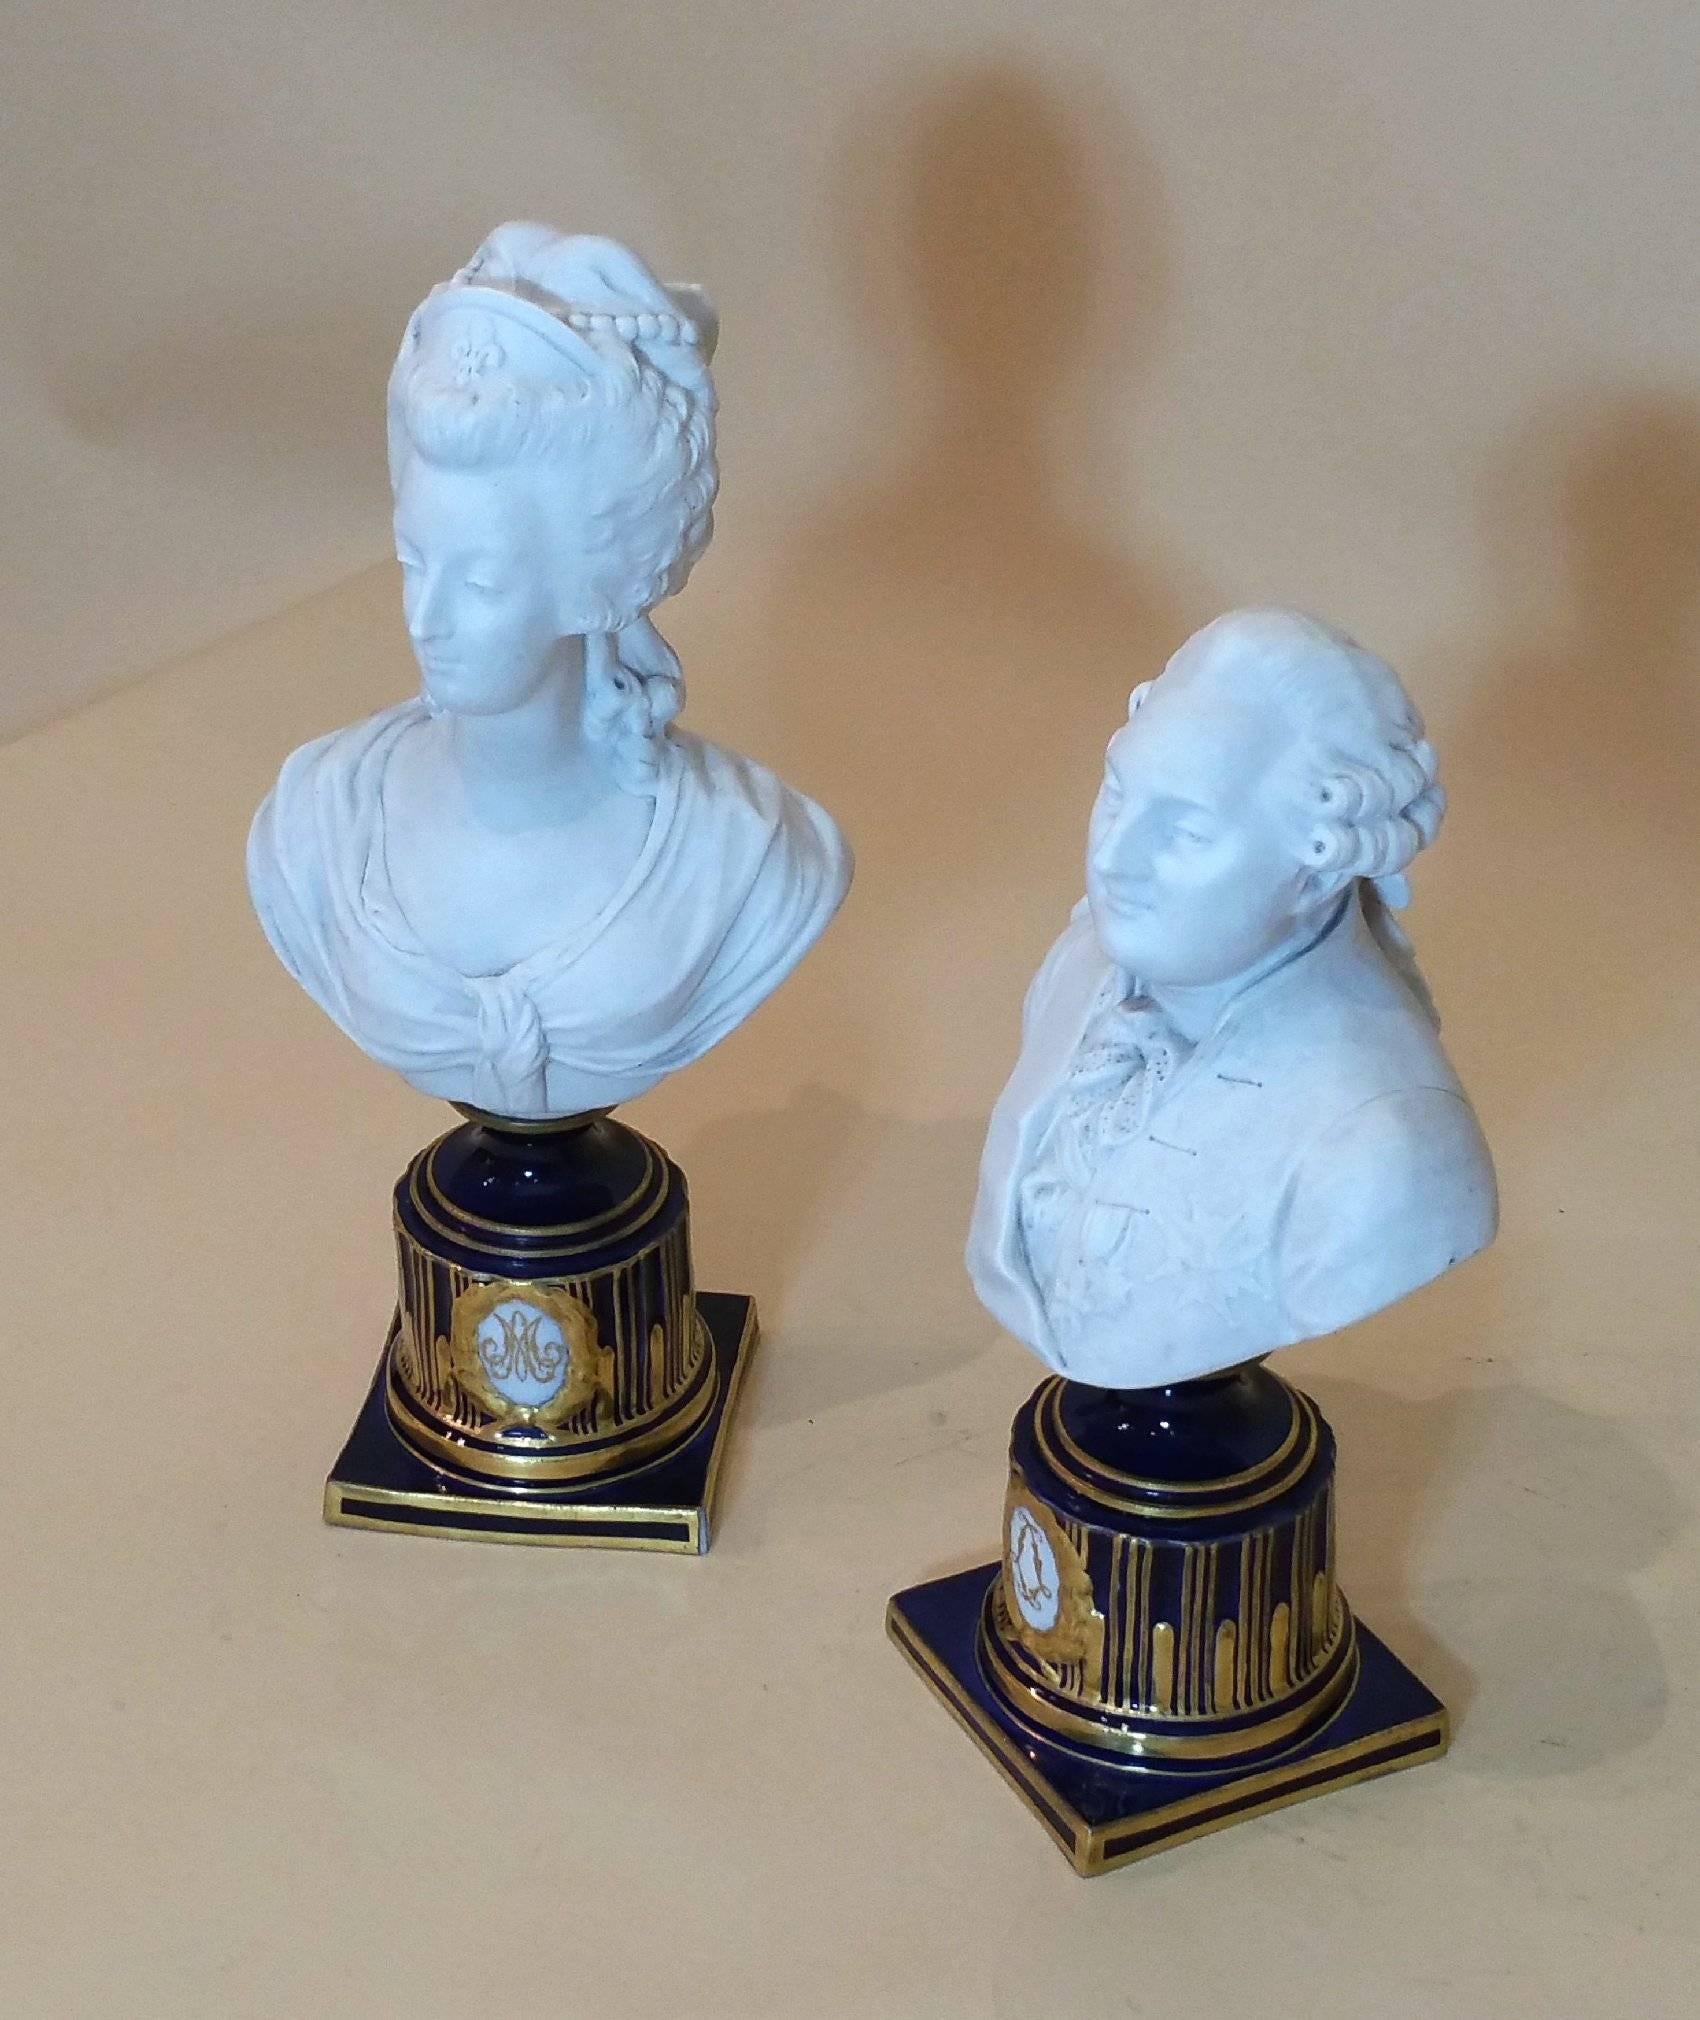 These outstanding and highly detailed busts of Louis XVI and Marie Antoinette are Sevres porcelain, a porcelain factory founded in 1738 at Chateau de Vincennes, France. The Busts are in bisque white, and each has been mounted on a dark royal blue